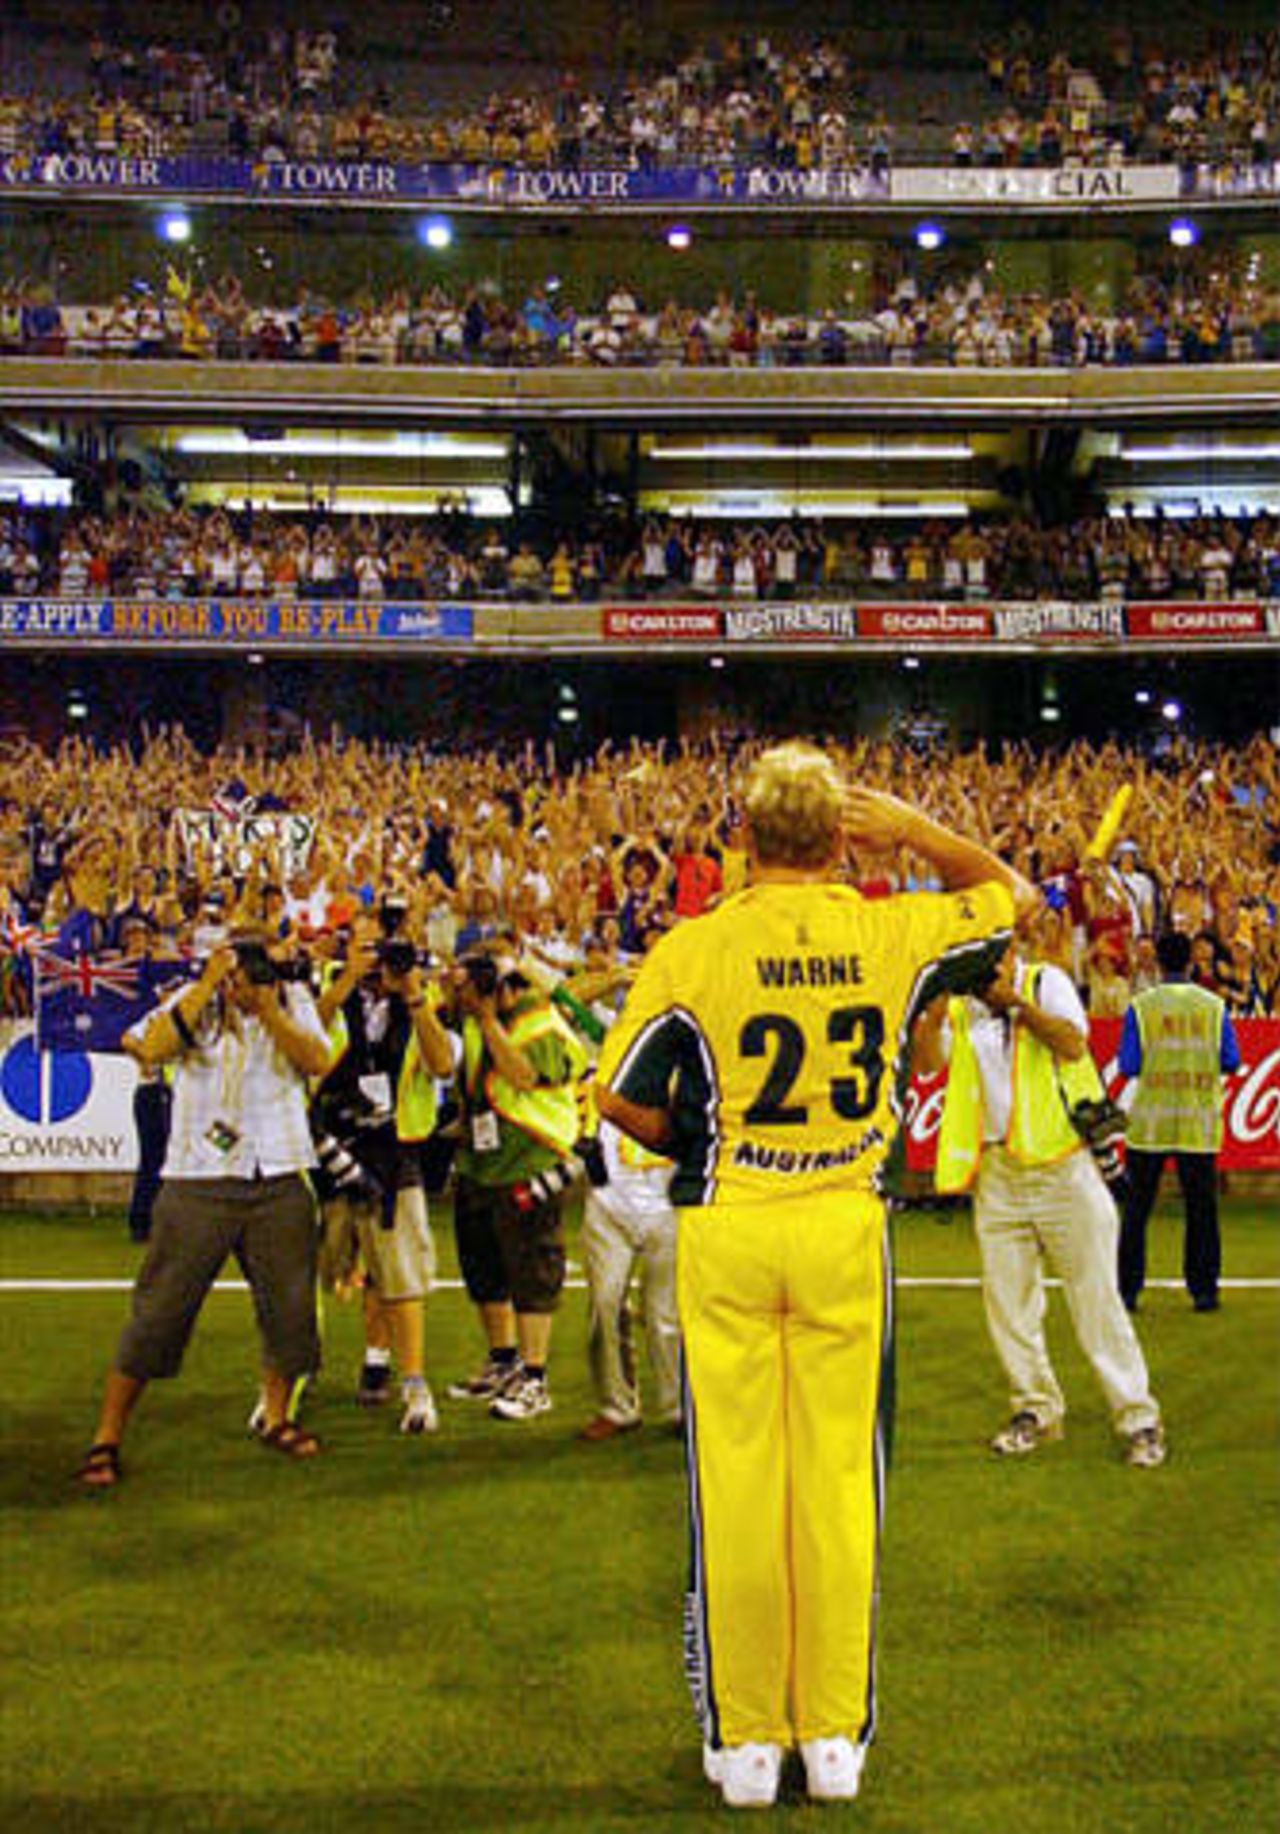 Shane Warne salutes the crowd at Melbourne after making his final ODI appearance, in the VB Series final against England, 25 Jan 2003